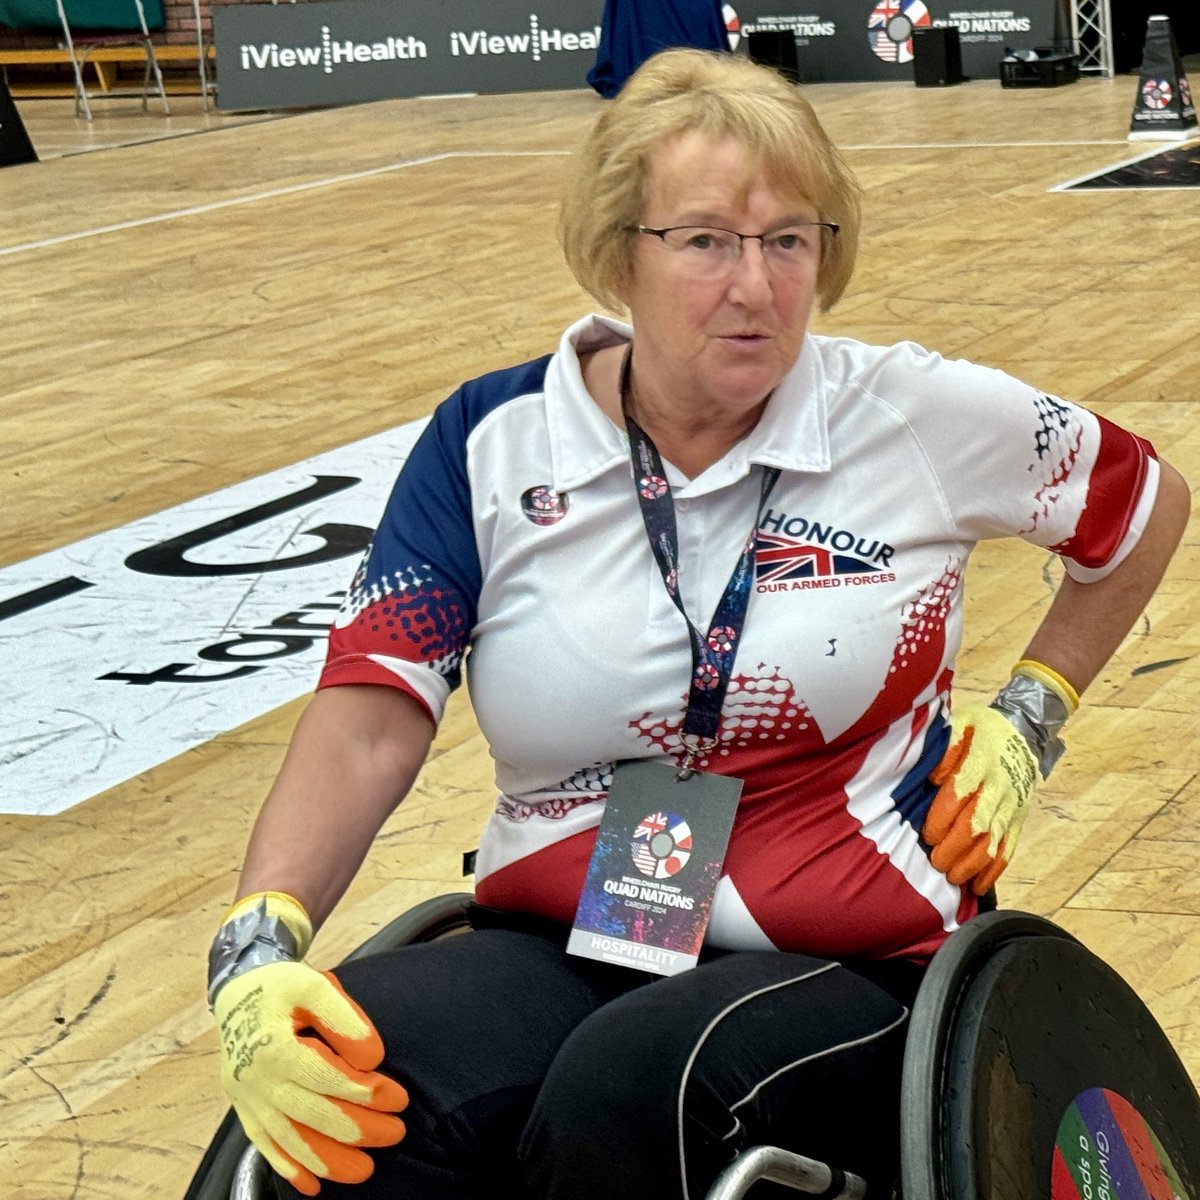 #TheseGirlsCan 😀 Female Participation in wheelchair rugby. Local Cardiff women from the corporate world tried out wheelchair rugby at the Quad Nations. Some of our current female players joined in and helped them. An amazing afternoon. #QuadNations #QN24 #cardiff